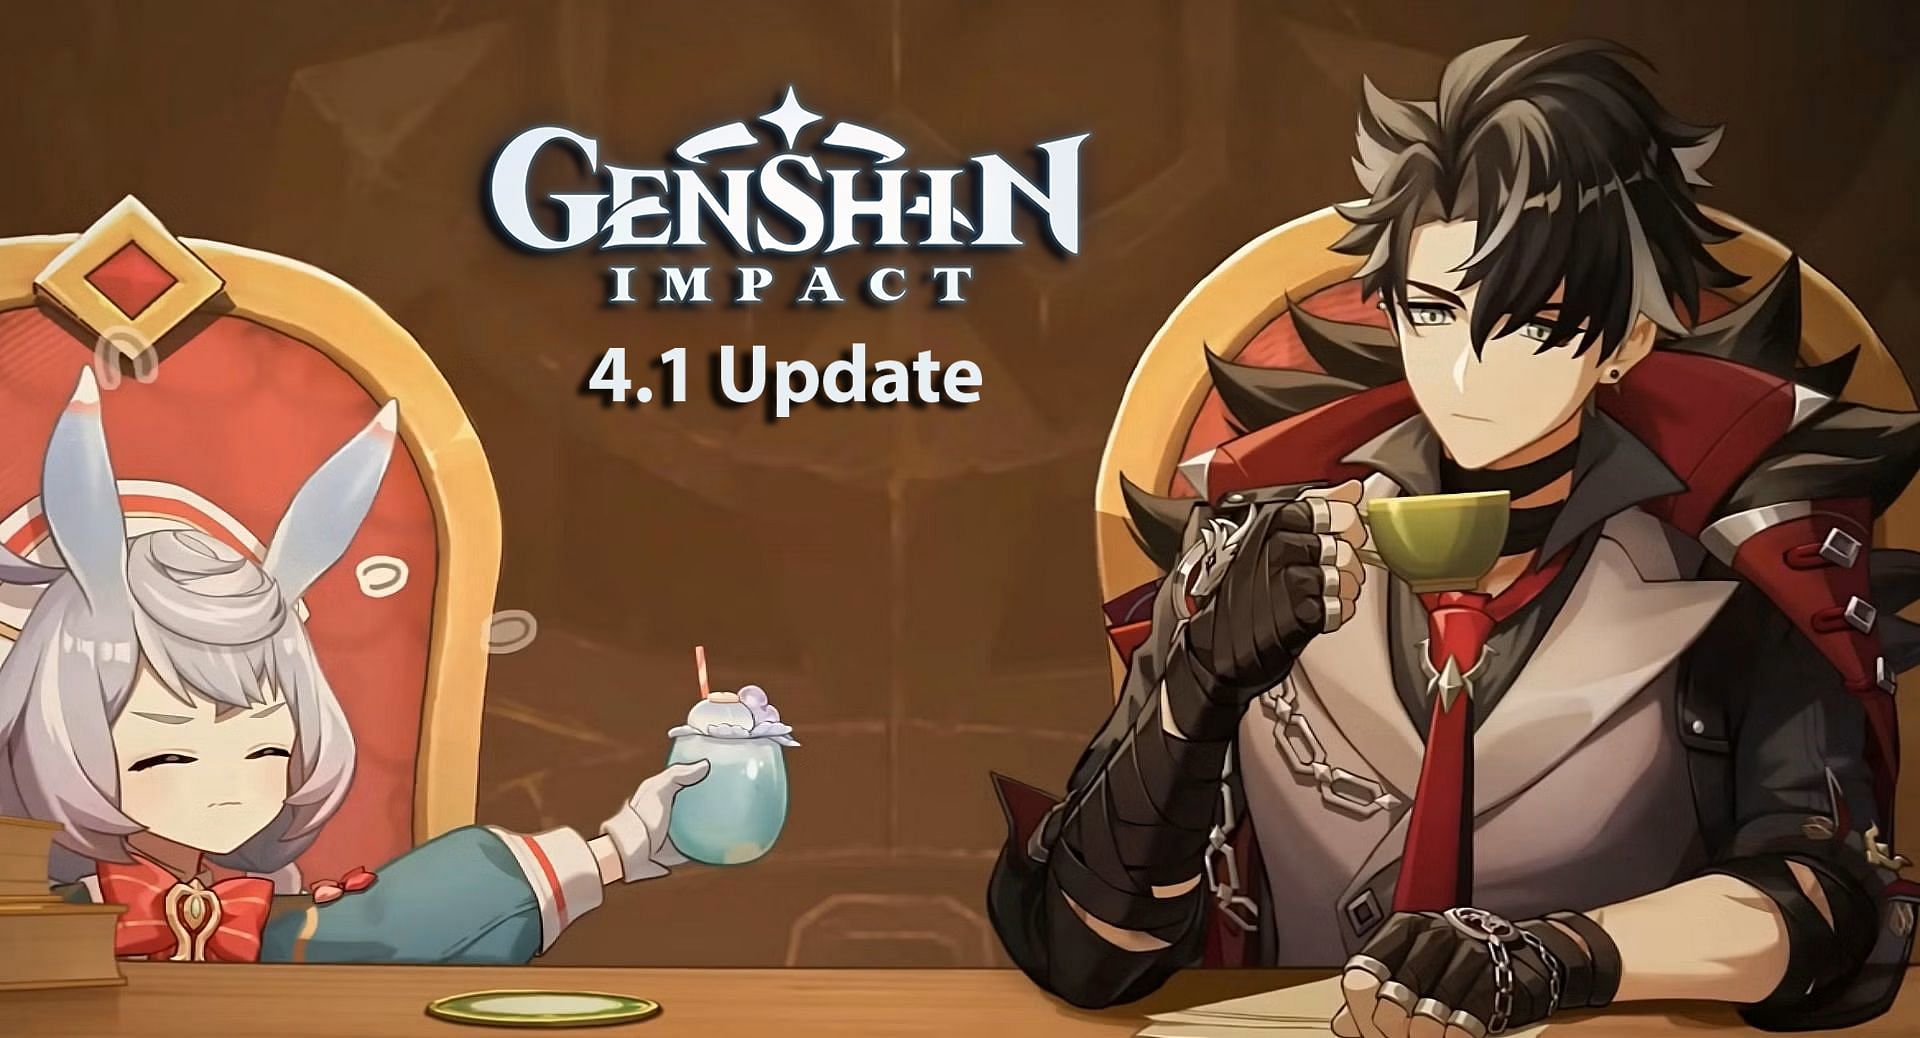 All information about the release of Genshin Impact